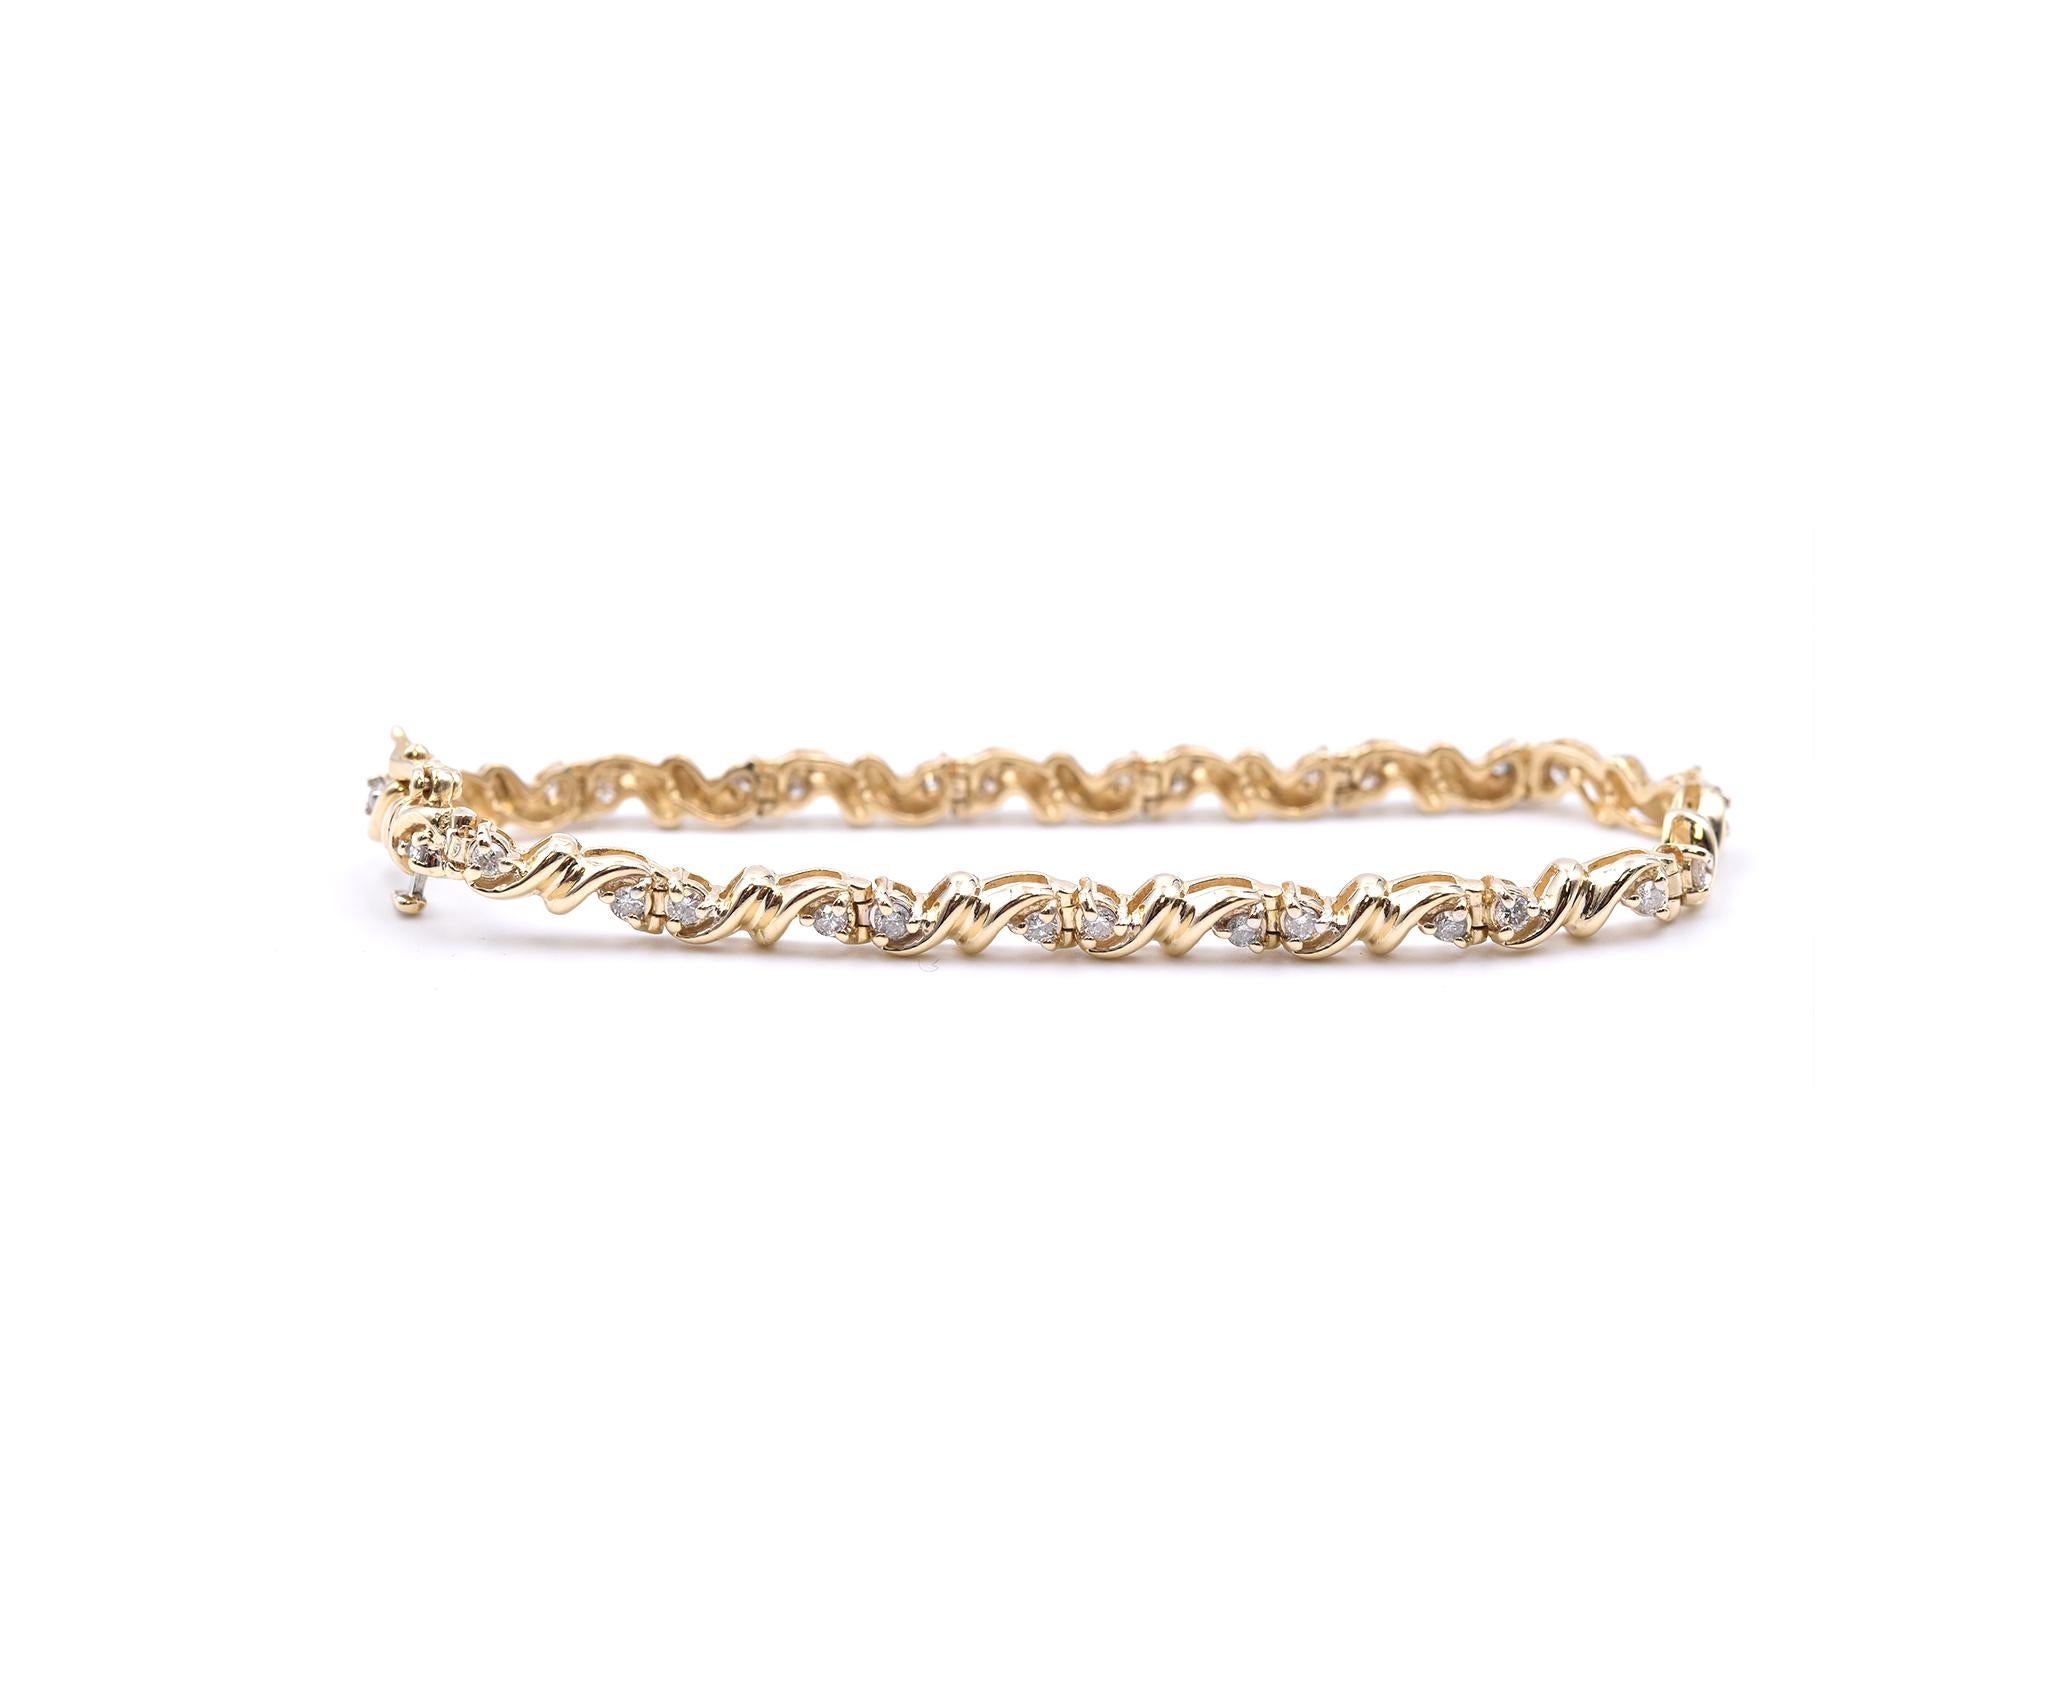 Material: 14K yellow gold 
Diamonds: 30 round cut = 1.00cttw
Color: G
Clarity: SI1
Dimensions: bracelet will fit up to a 7-inch wrist
Weight: 11.3 grams